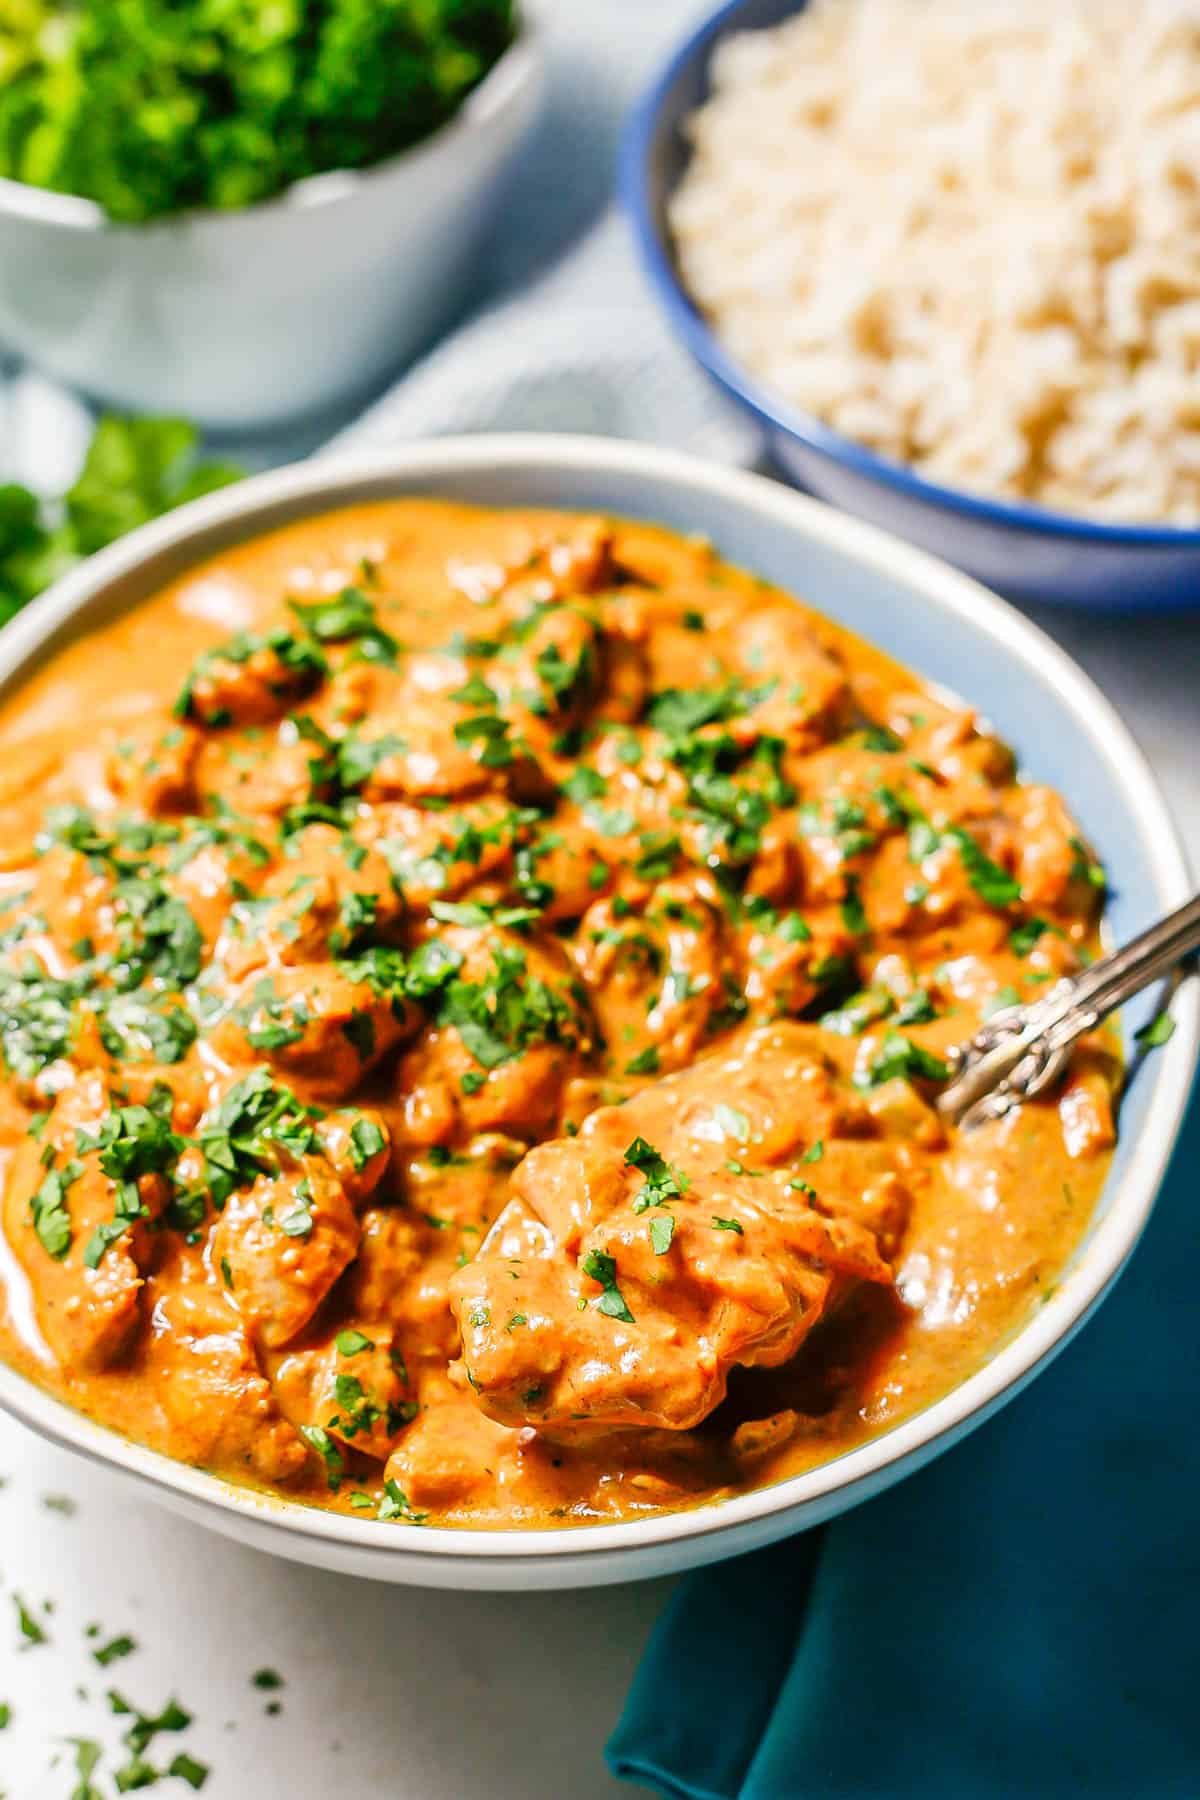 A spoon resting in a bowl of creamy butter chicken with a bowl of rice in the background.